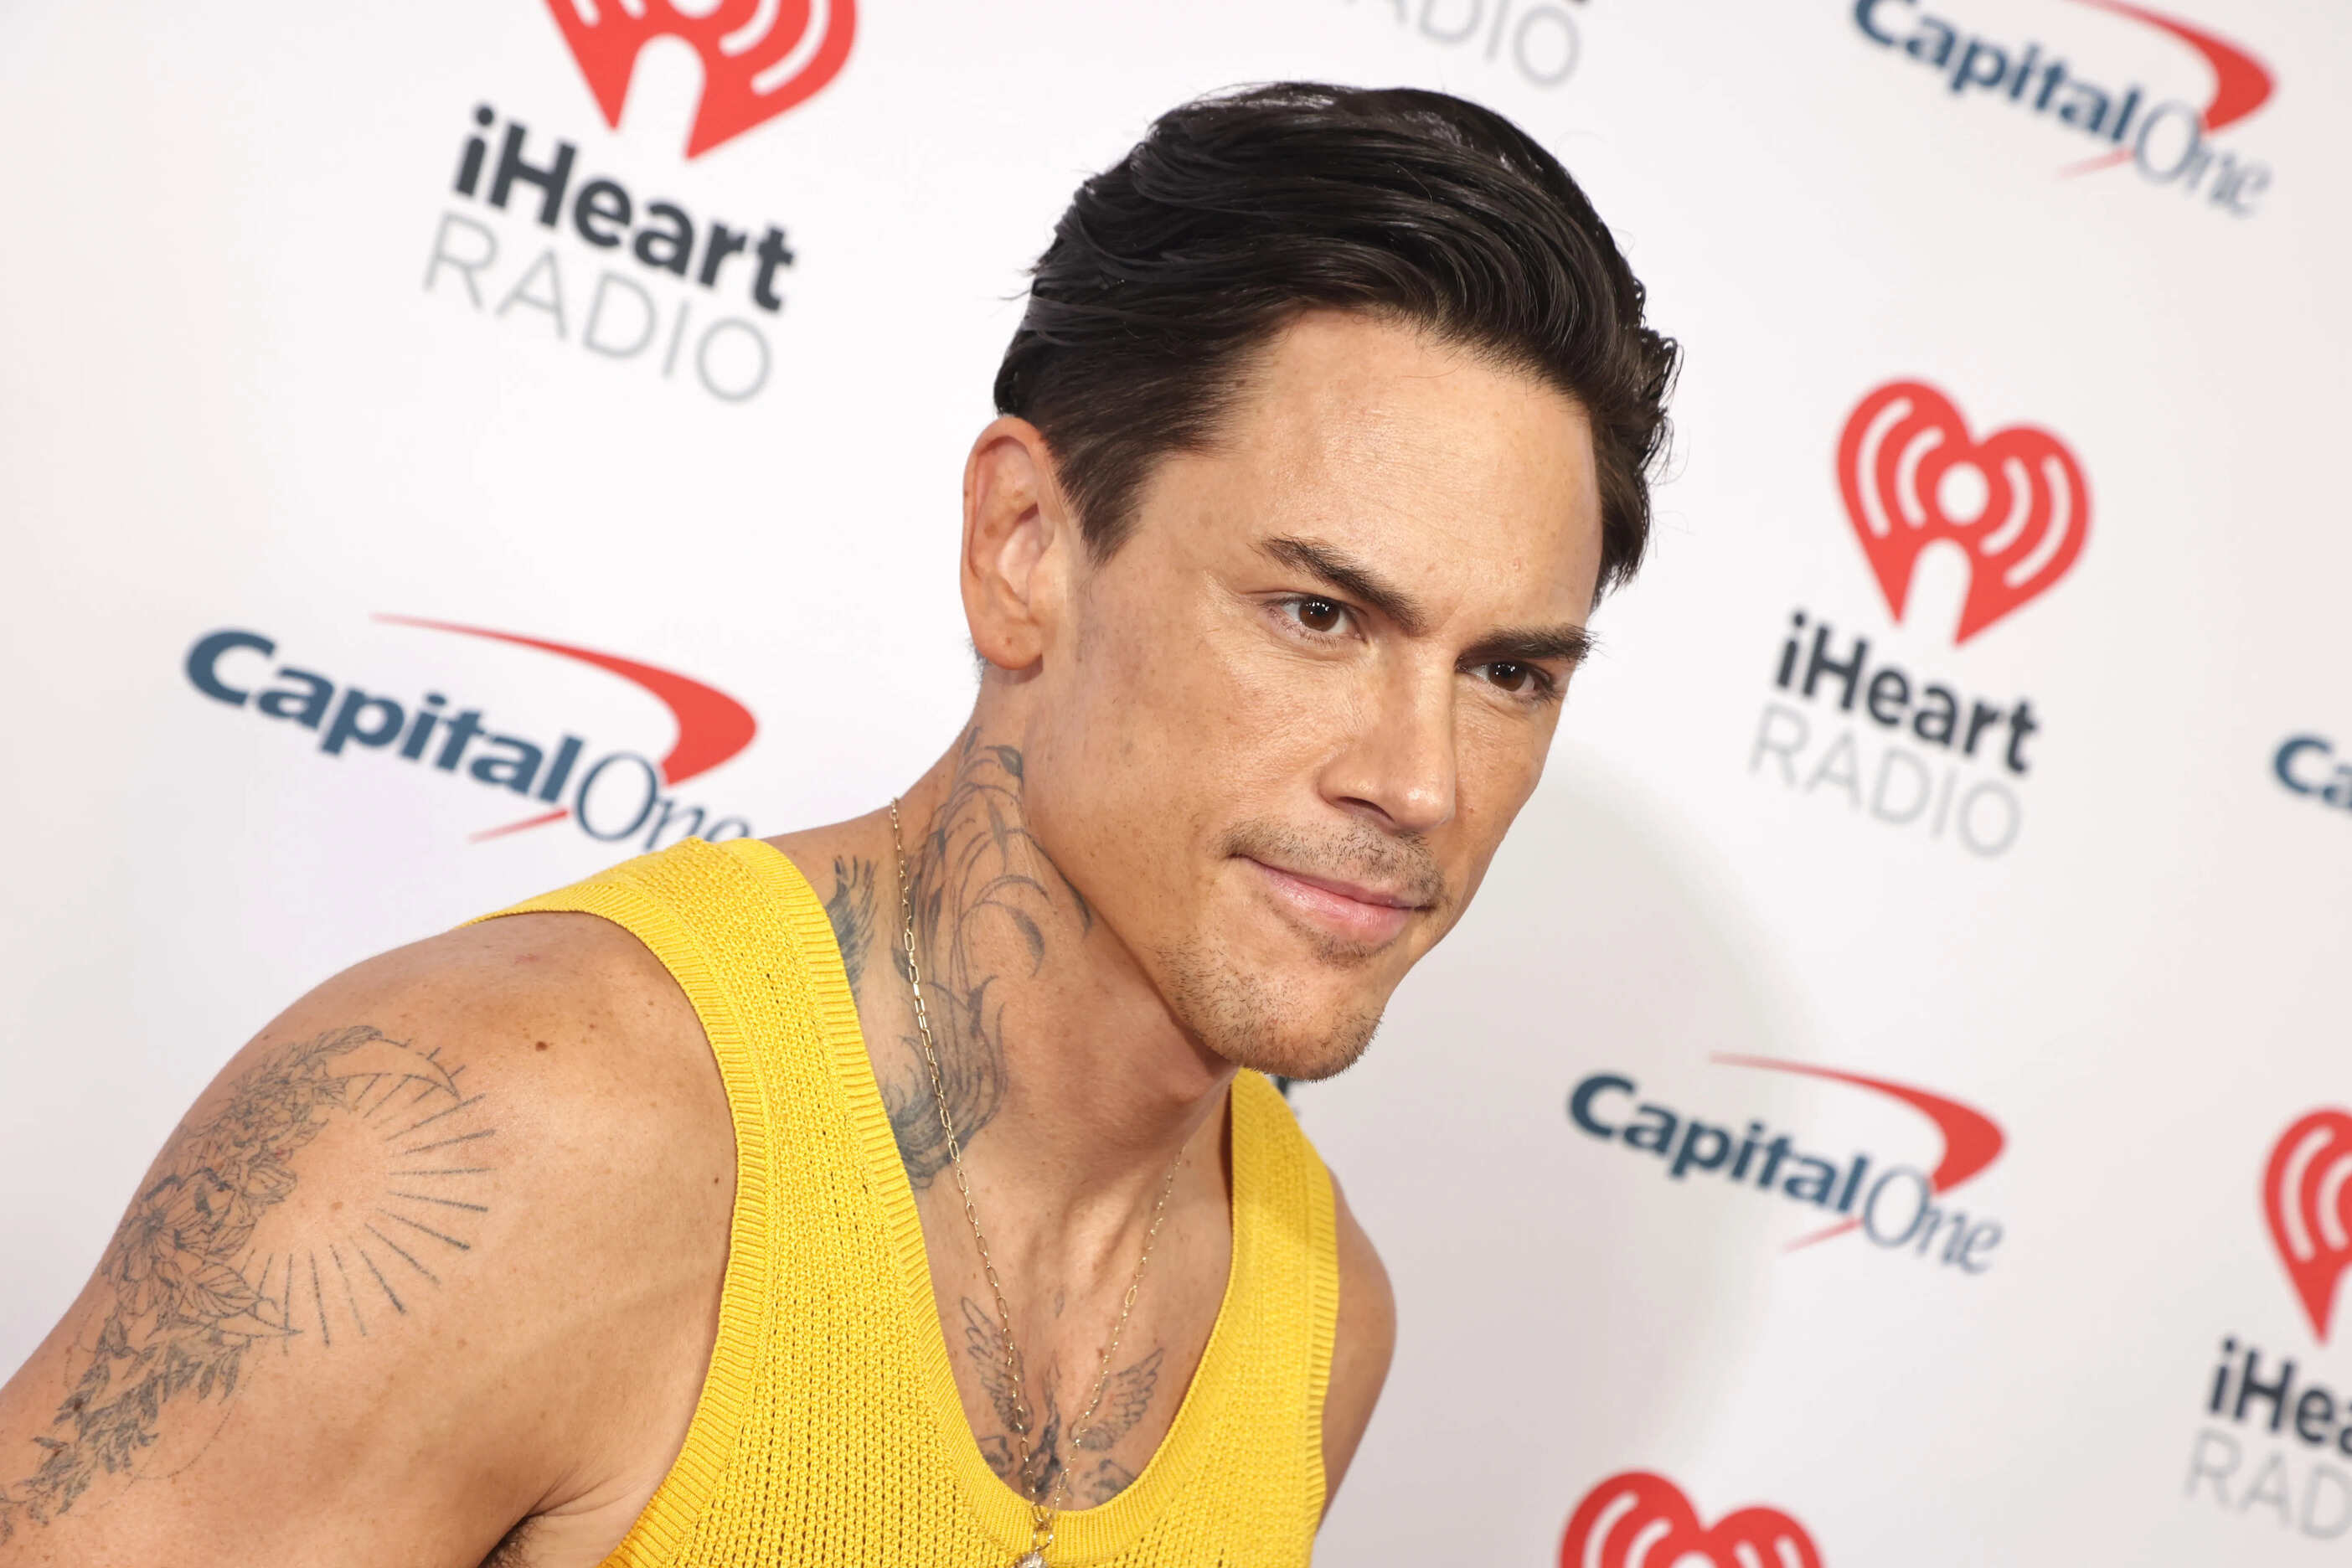 New Zealand Provides Solace For Tom Sandoval Amid Scandoval Uproar